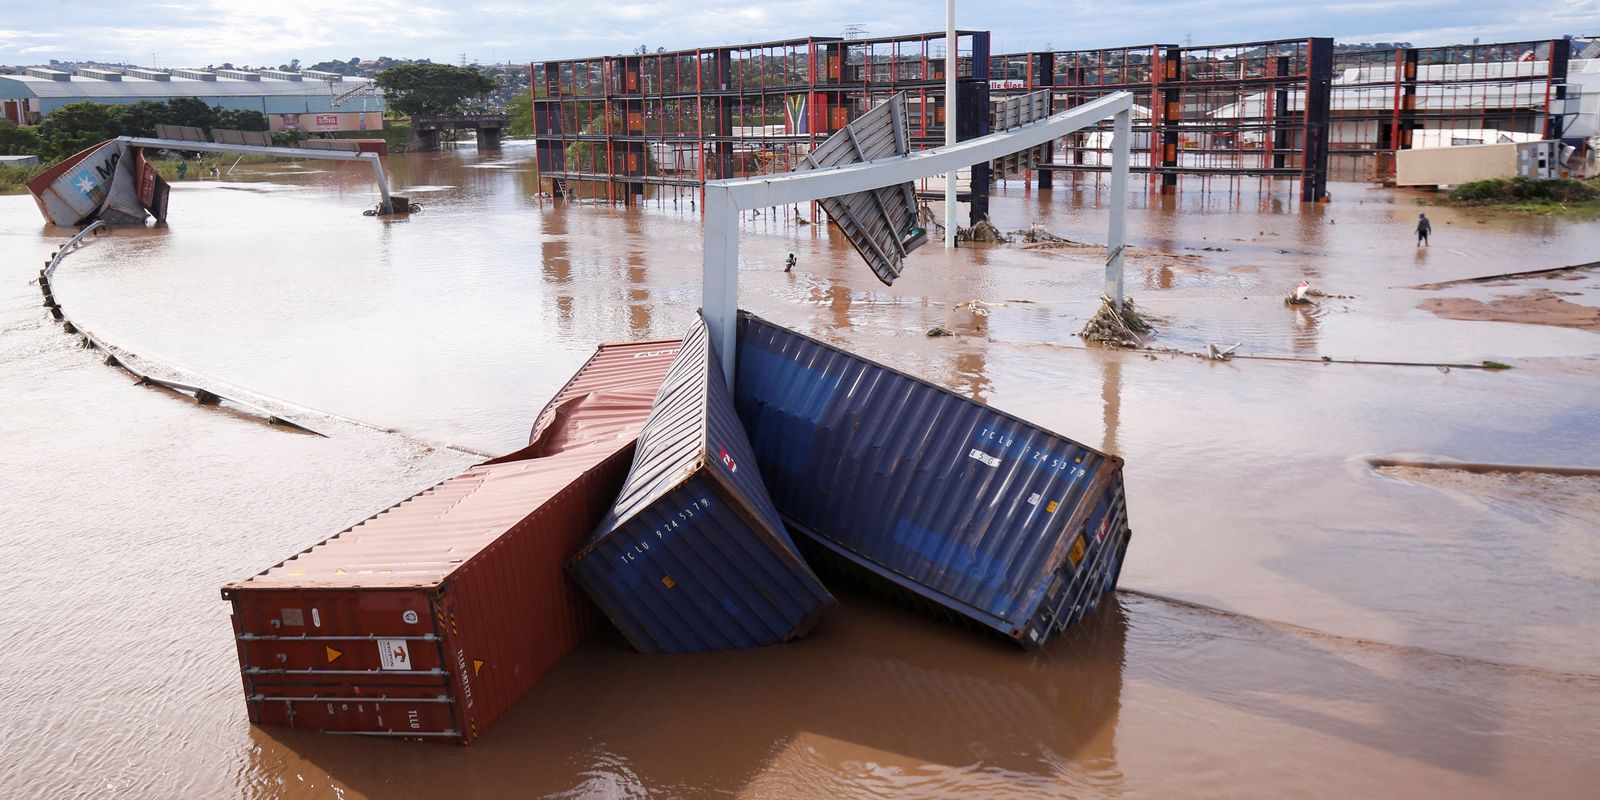 A view of shipping containers, which were washed away after heavy rains caused flooding, in Durban